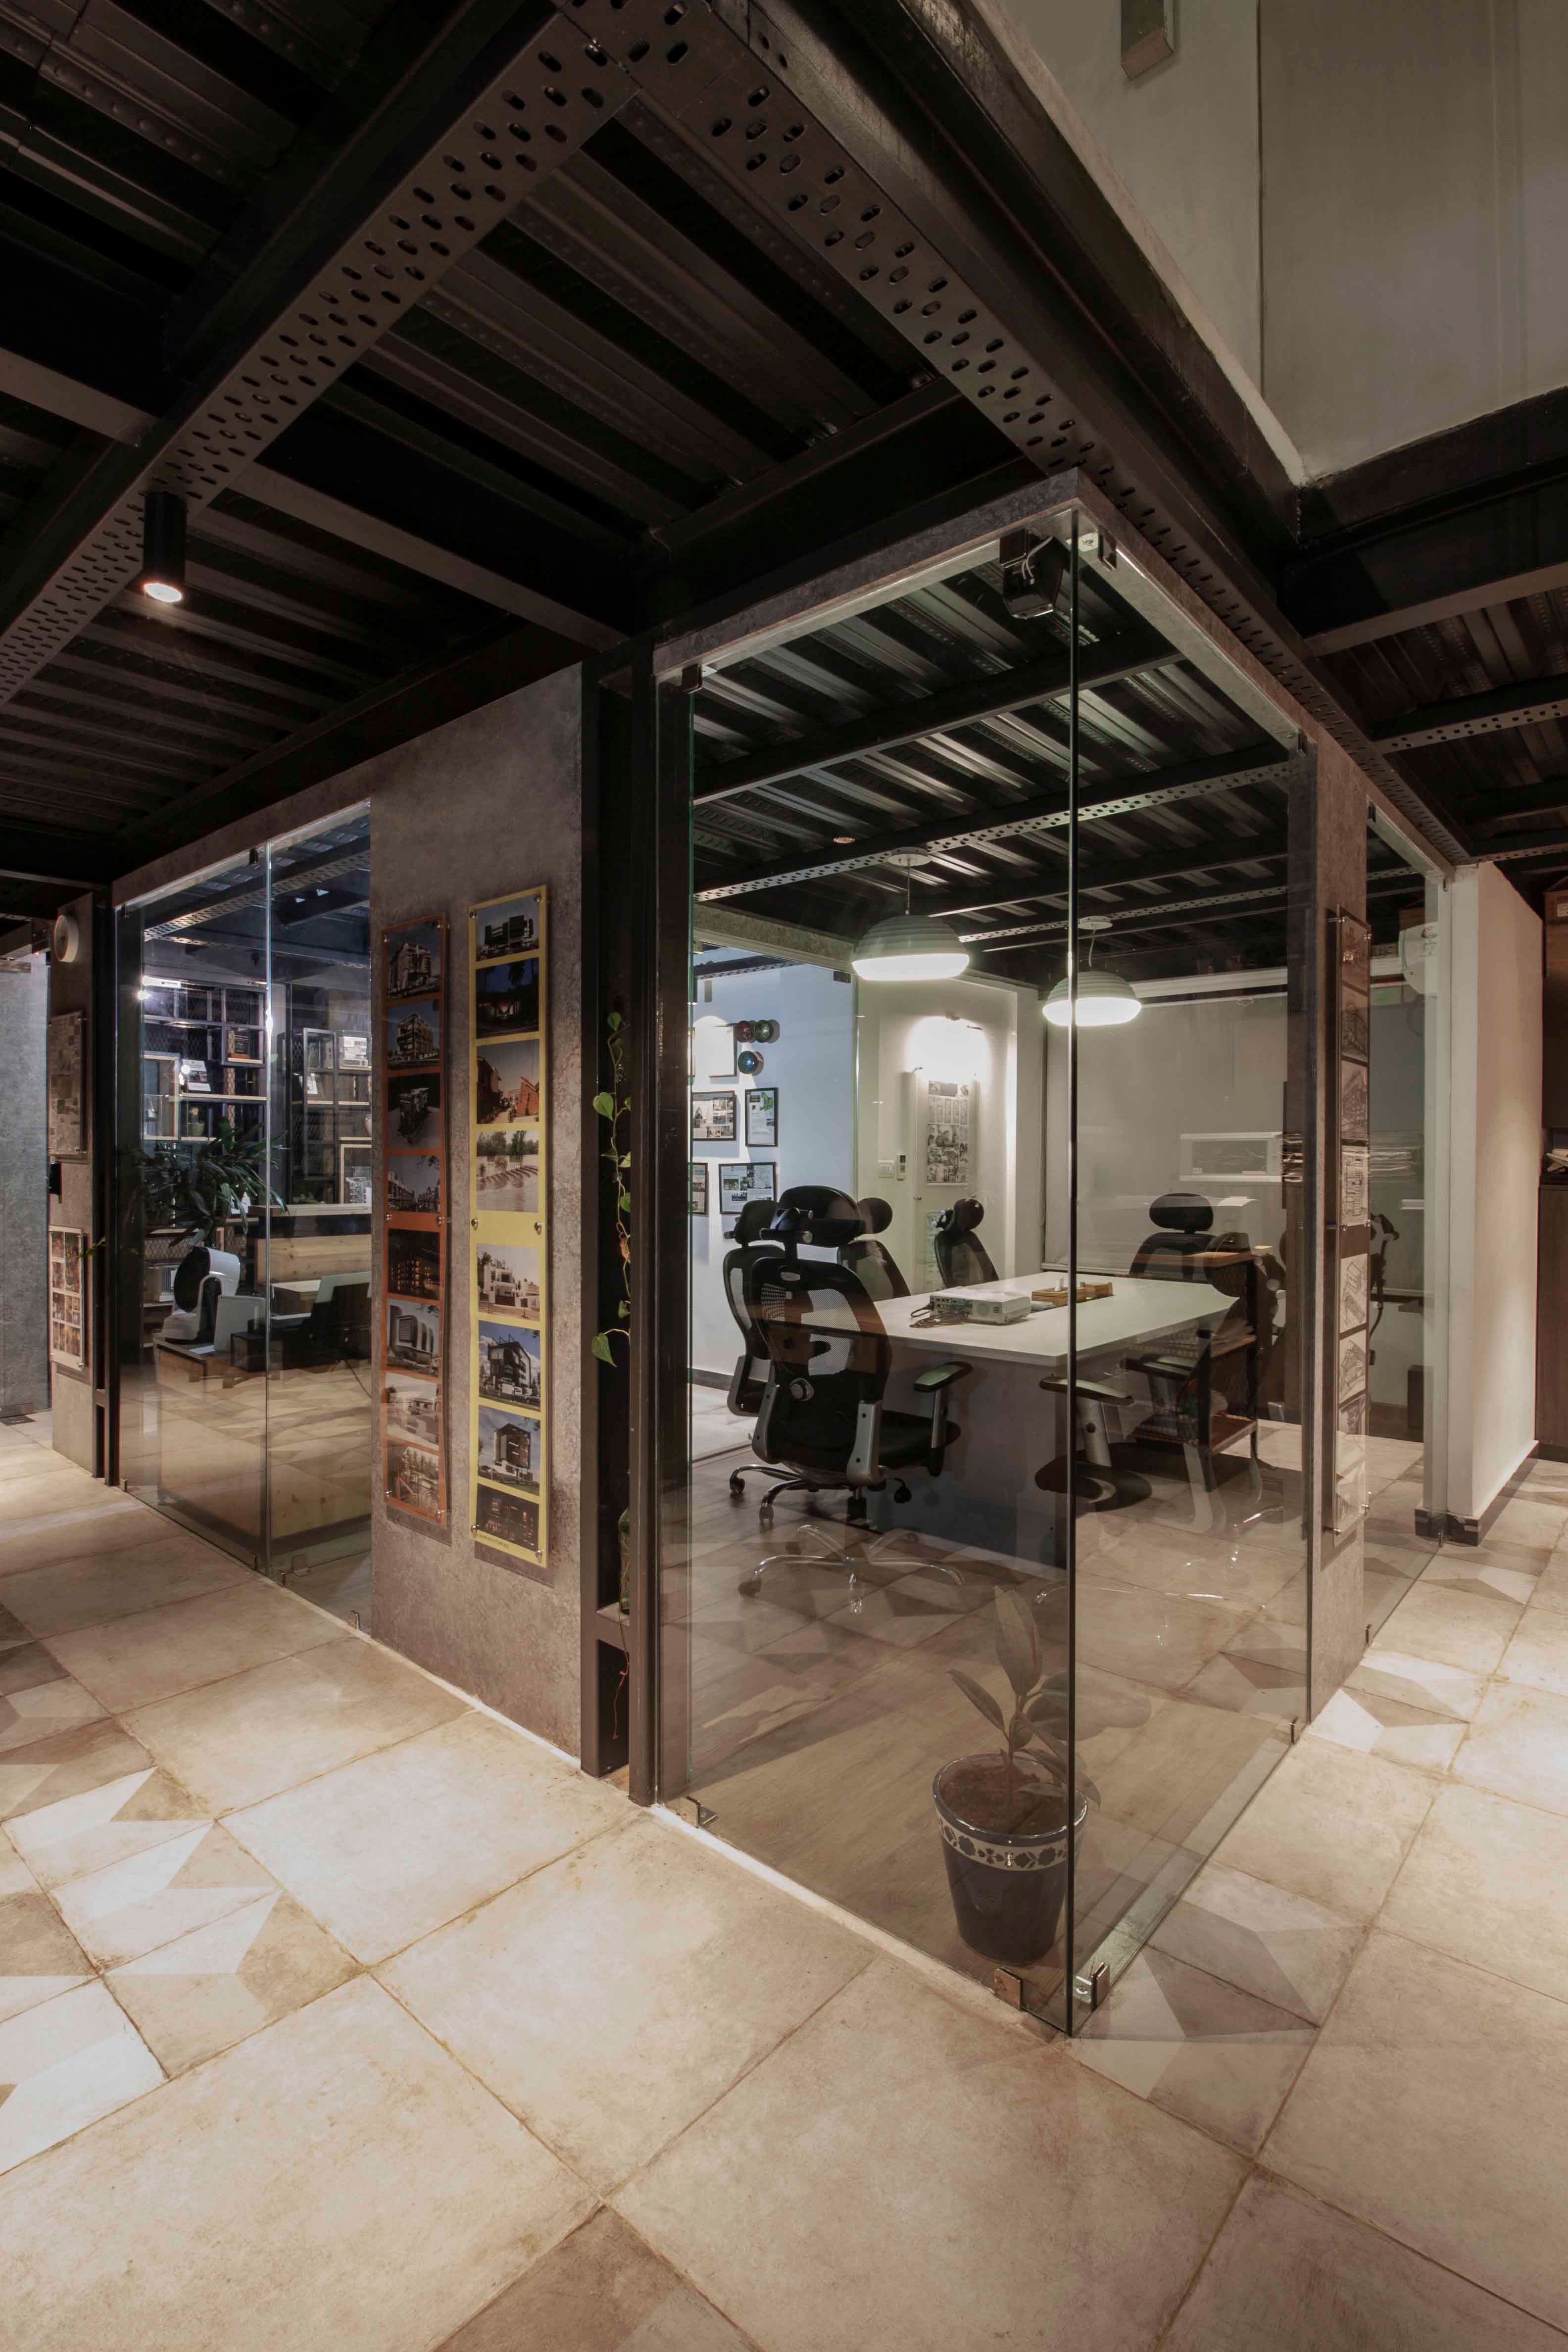 Use of glass partition walls lend an air of sophistication and appeal to the workspace interiors along with great visual connectivity within the workspace.